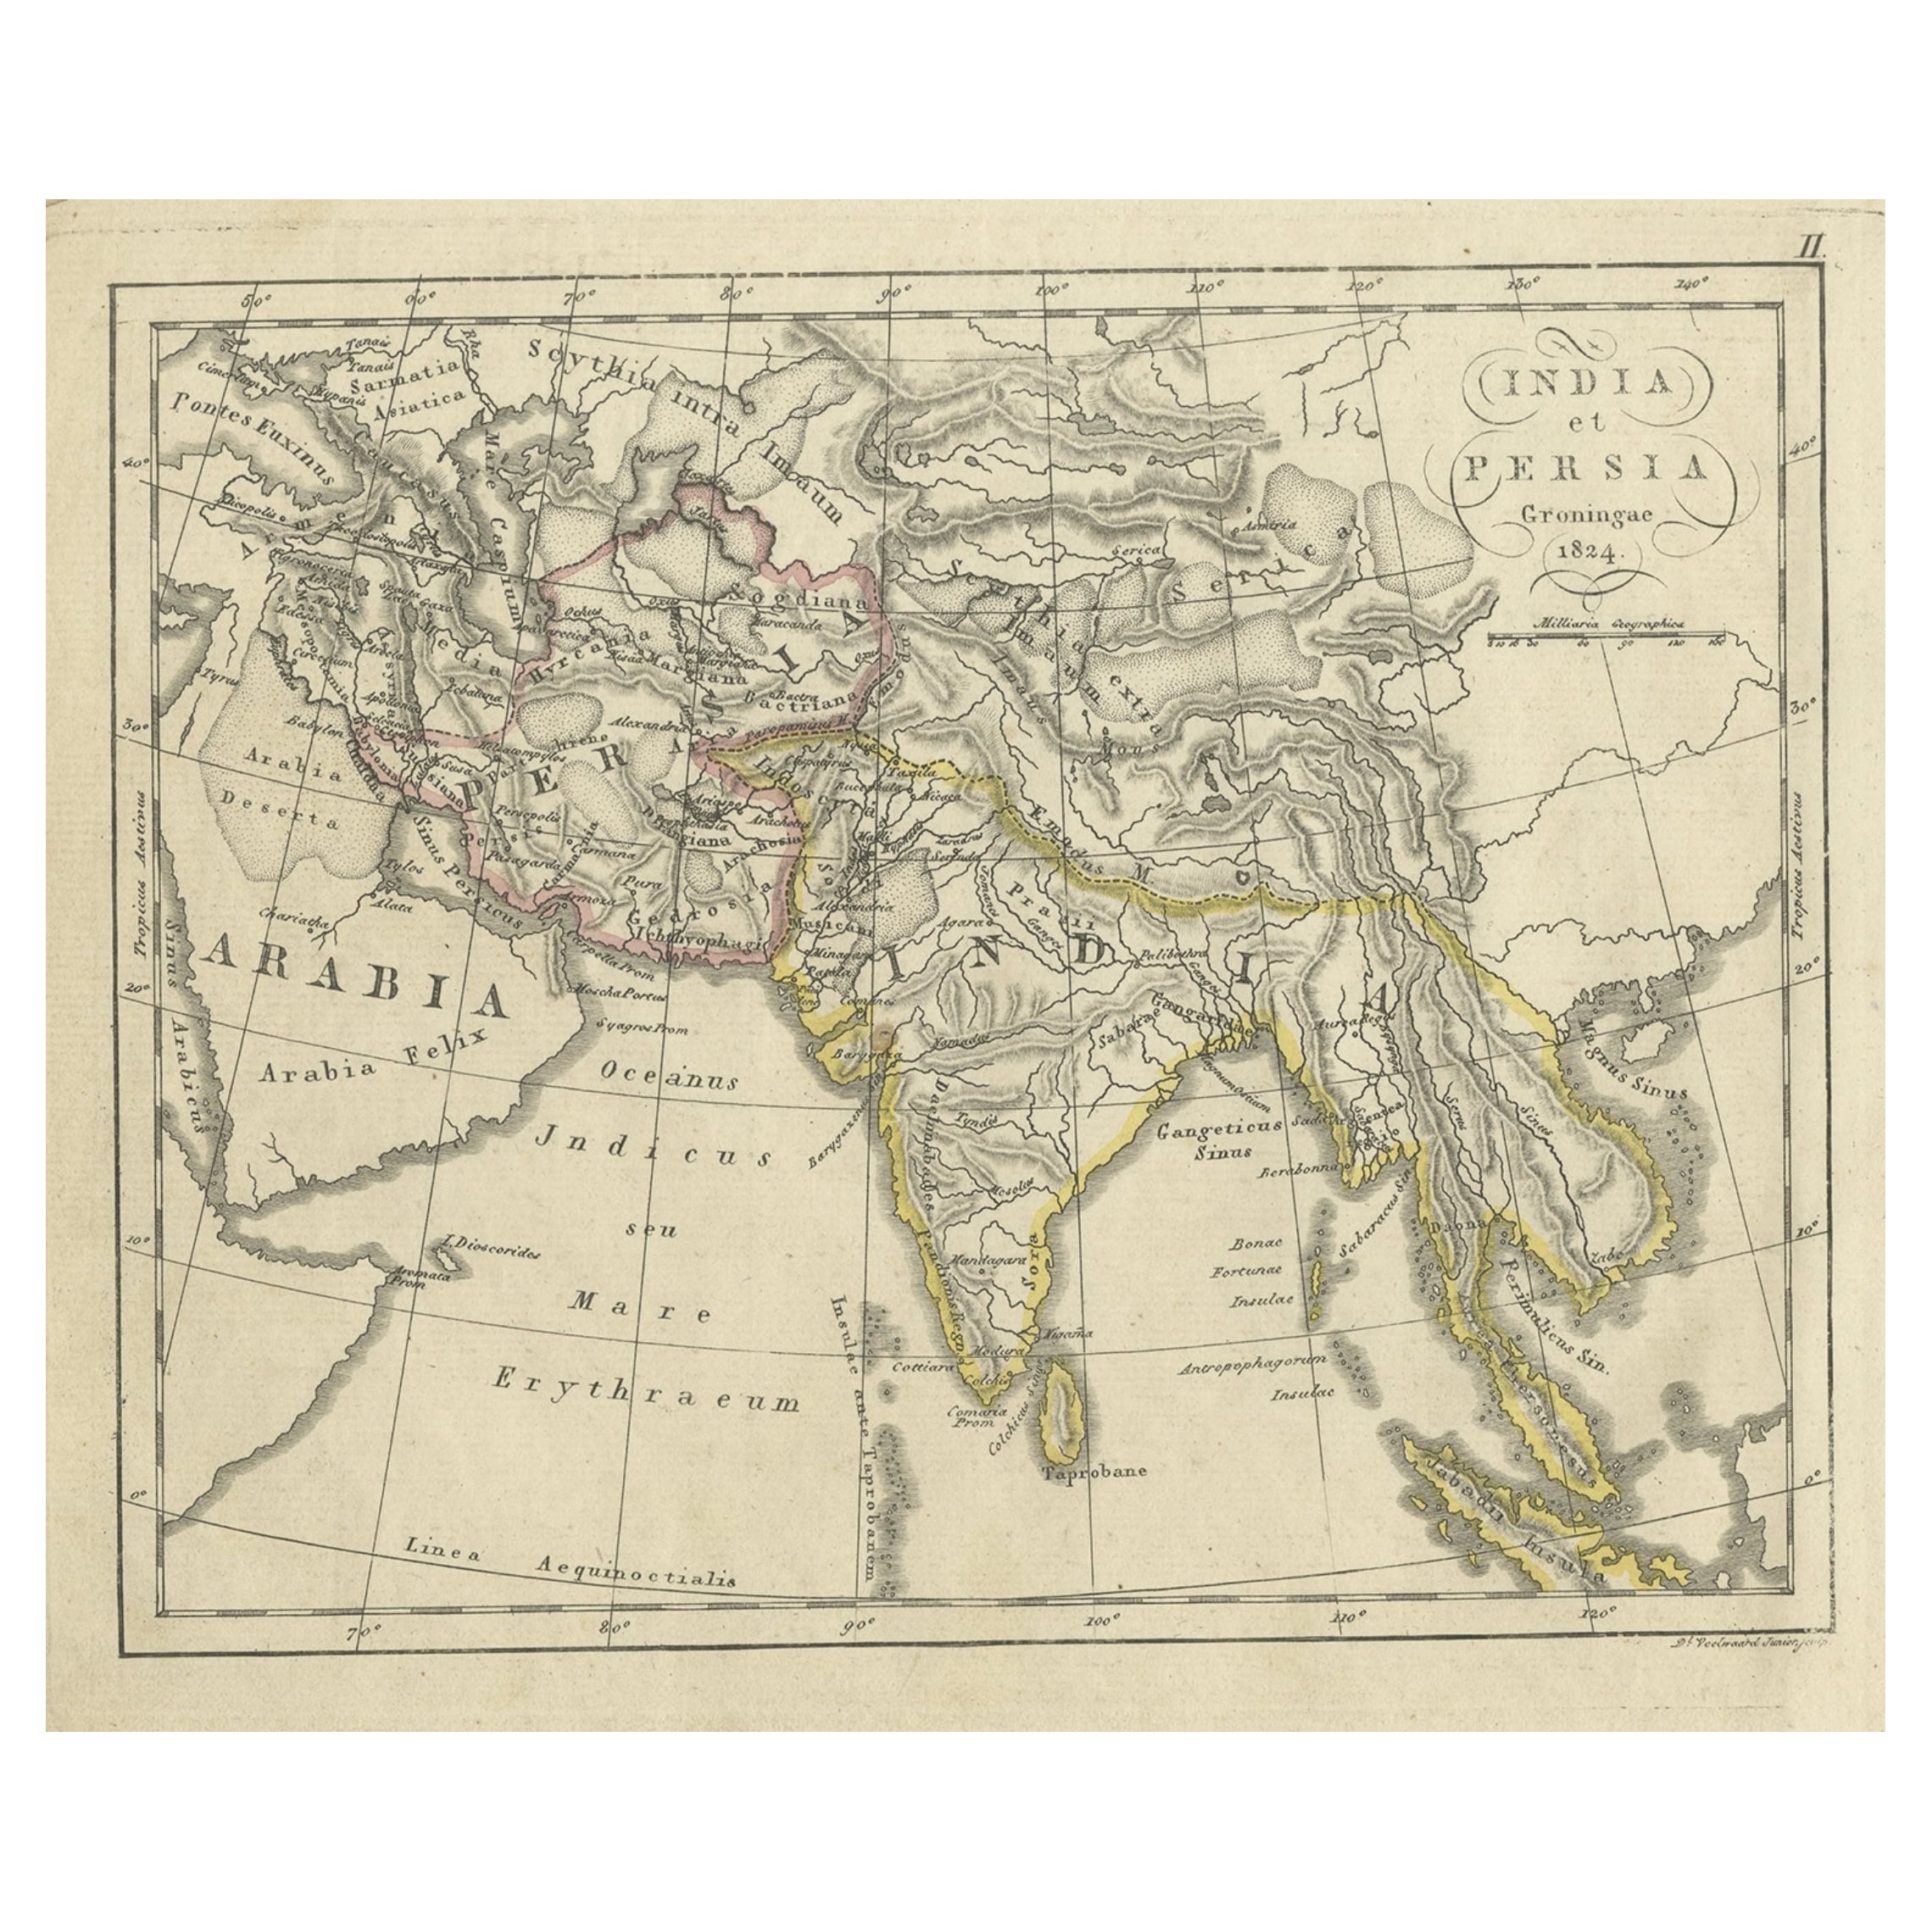 Antique Engraved Map of India and Persia, 1825